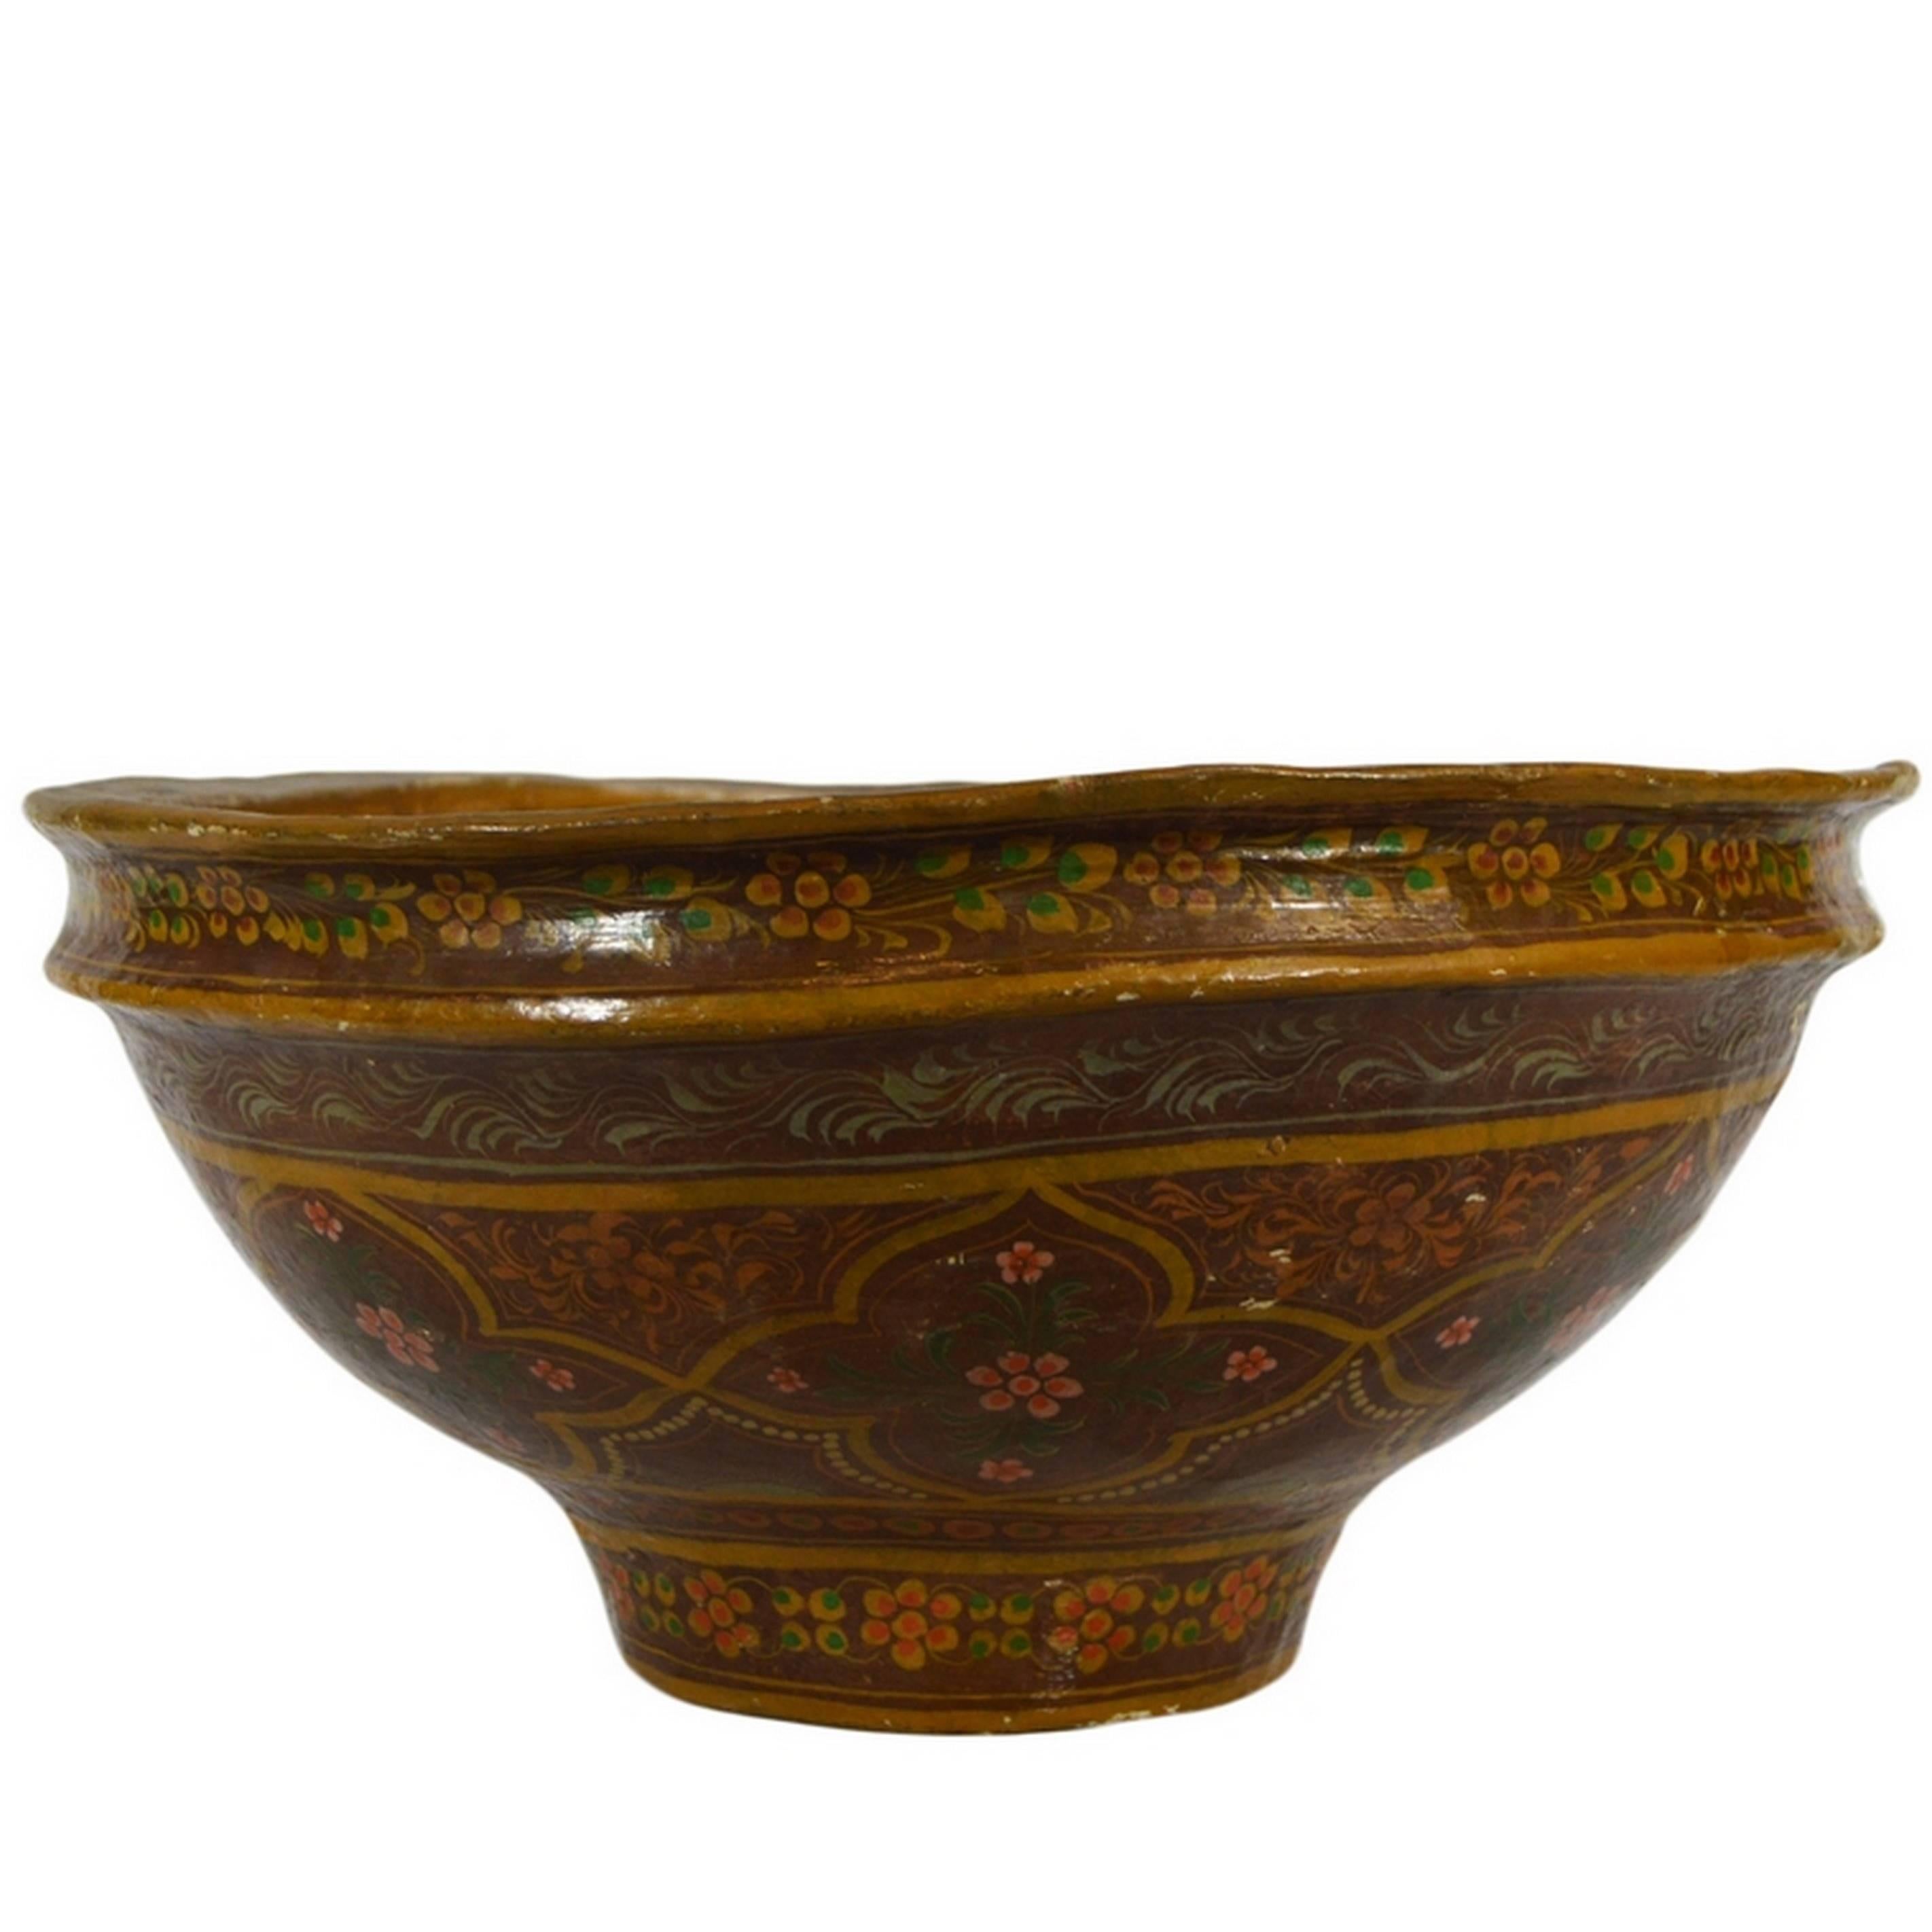 Antique Hand-Painted Indian Bowl